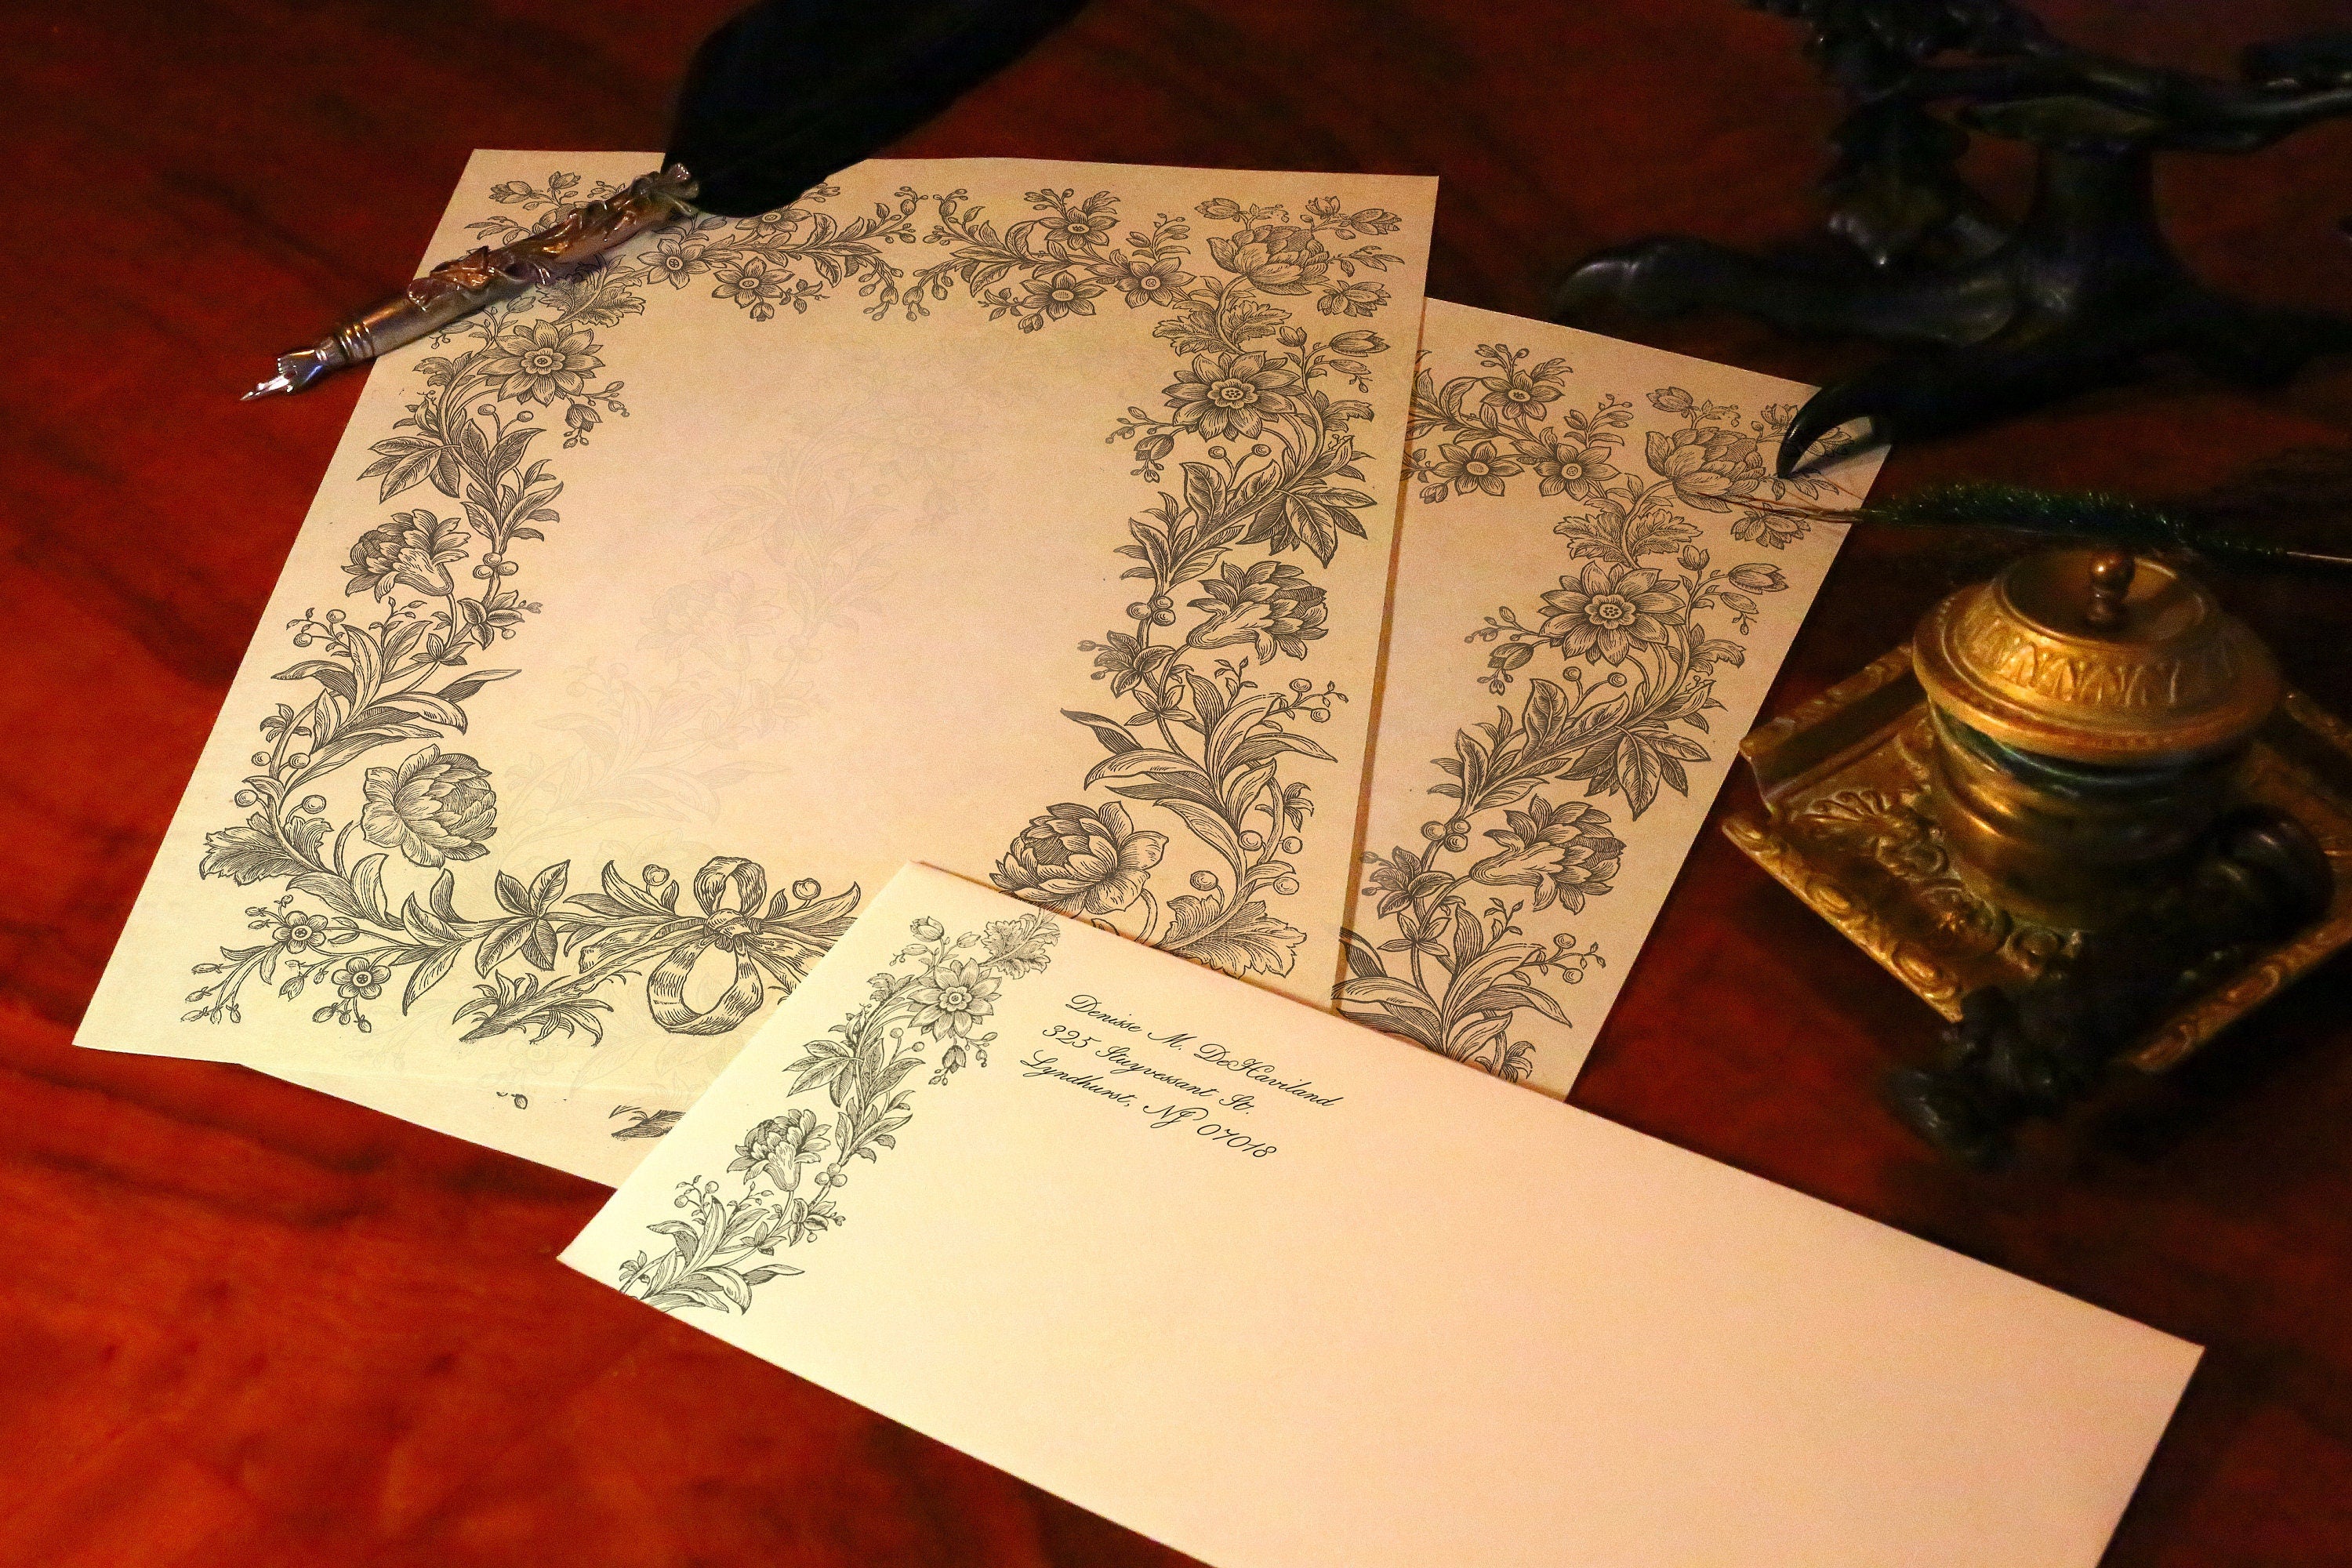 Vintage Floral, Luxurious Handcrafted Stationery Set for Letter Writing, Personalized, 12 Sheets/10 Envelopes